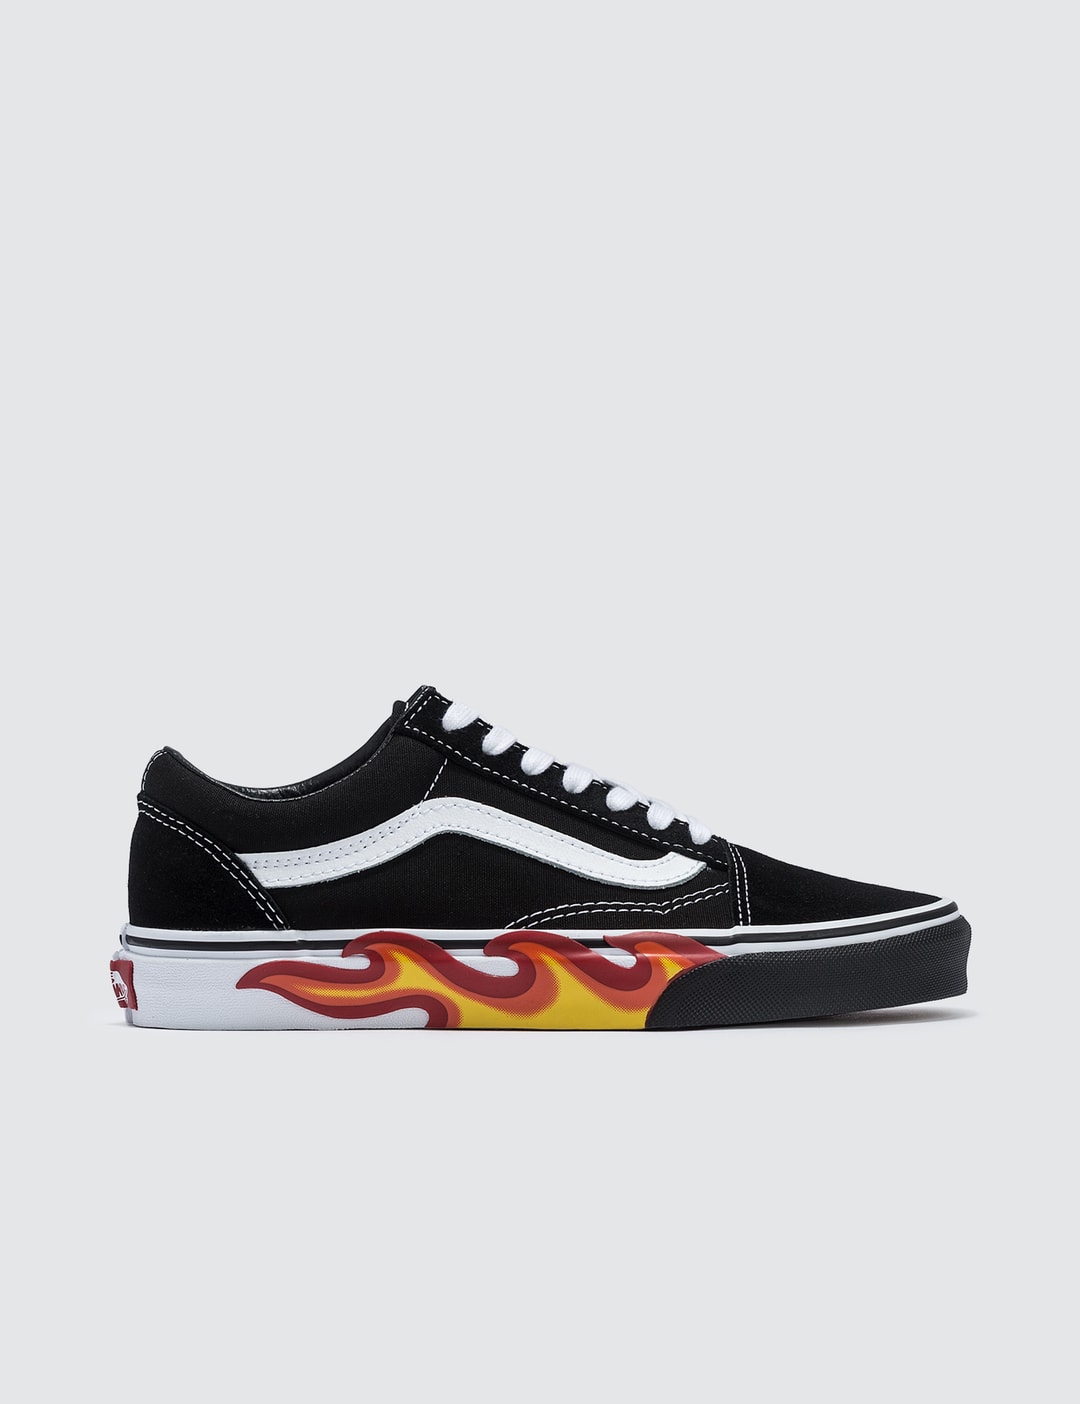 Vans - Flame Cut Out Old Skool | HBX - Globally Curated Fashion and ...